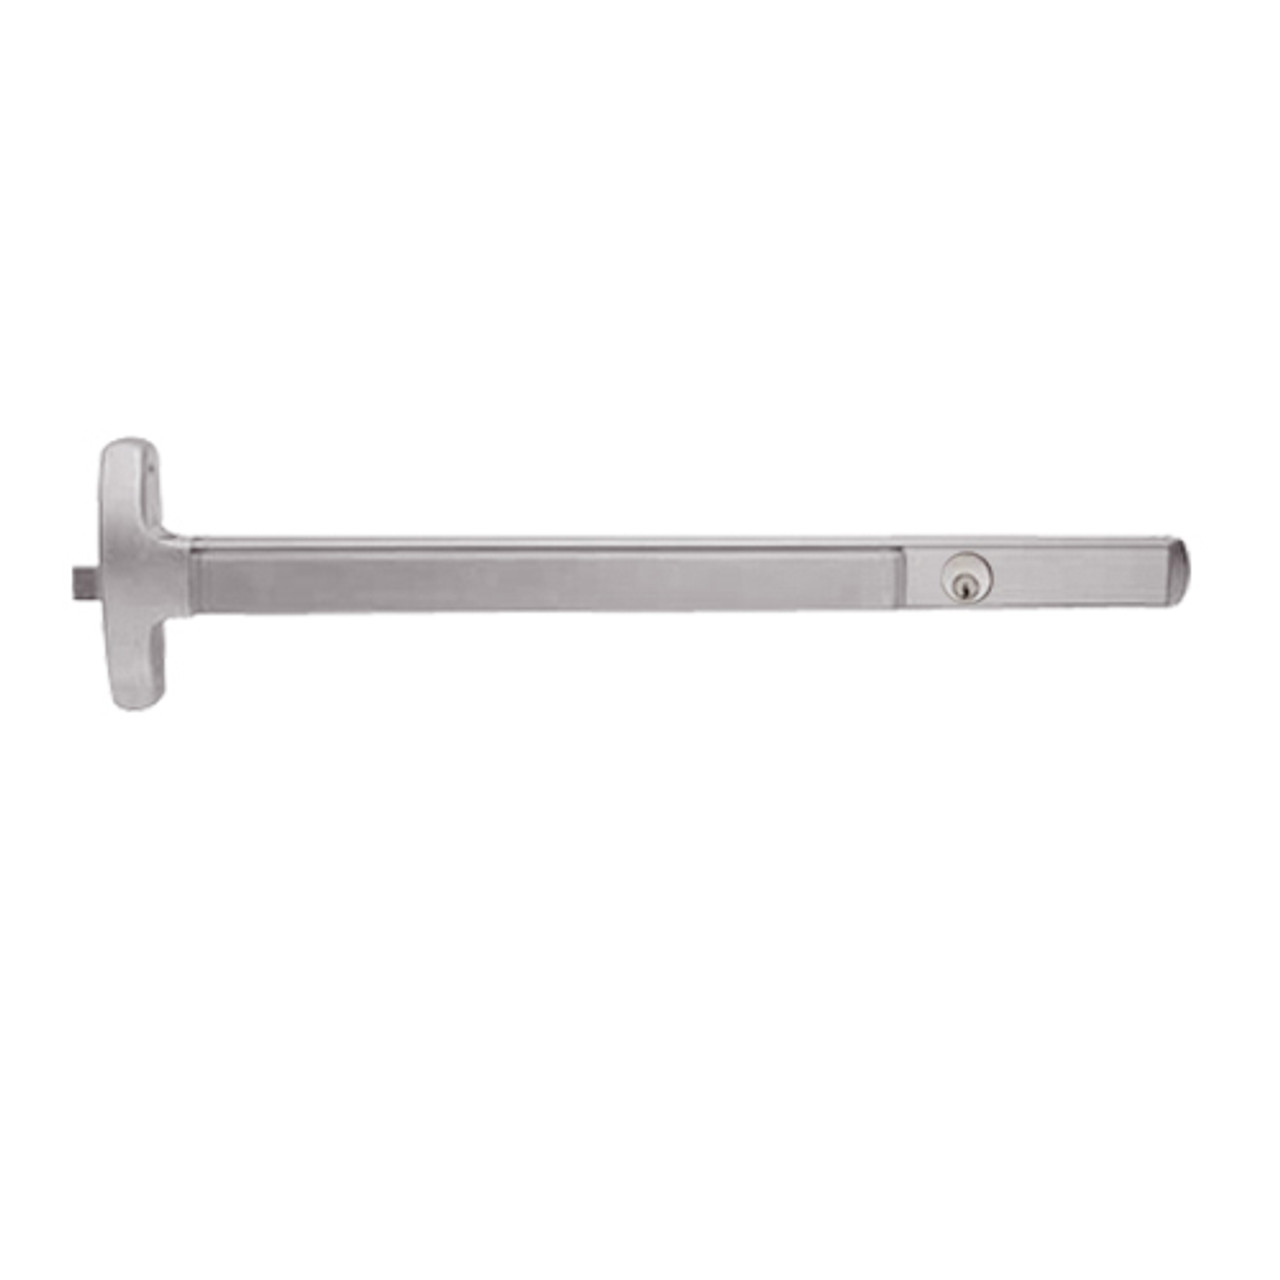 CD24-R-EO-US28-4 Falcon Exit Device in Anodized Aluminum